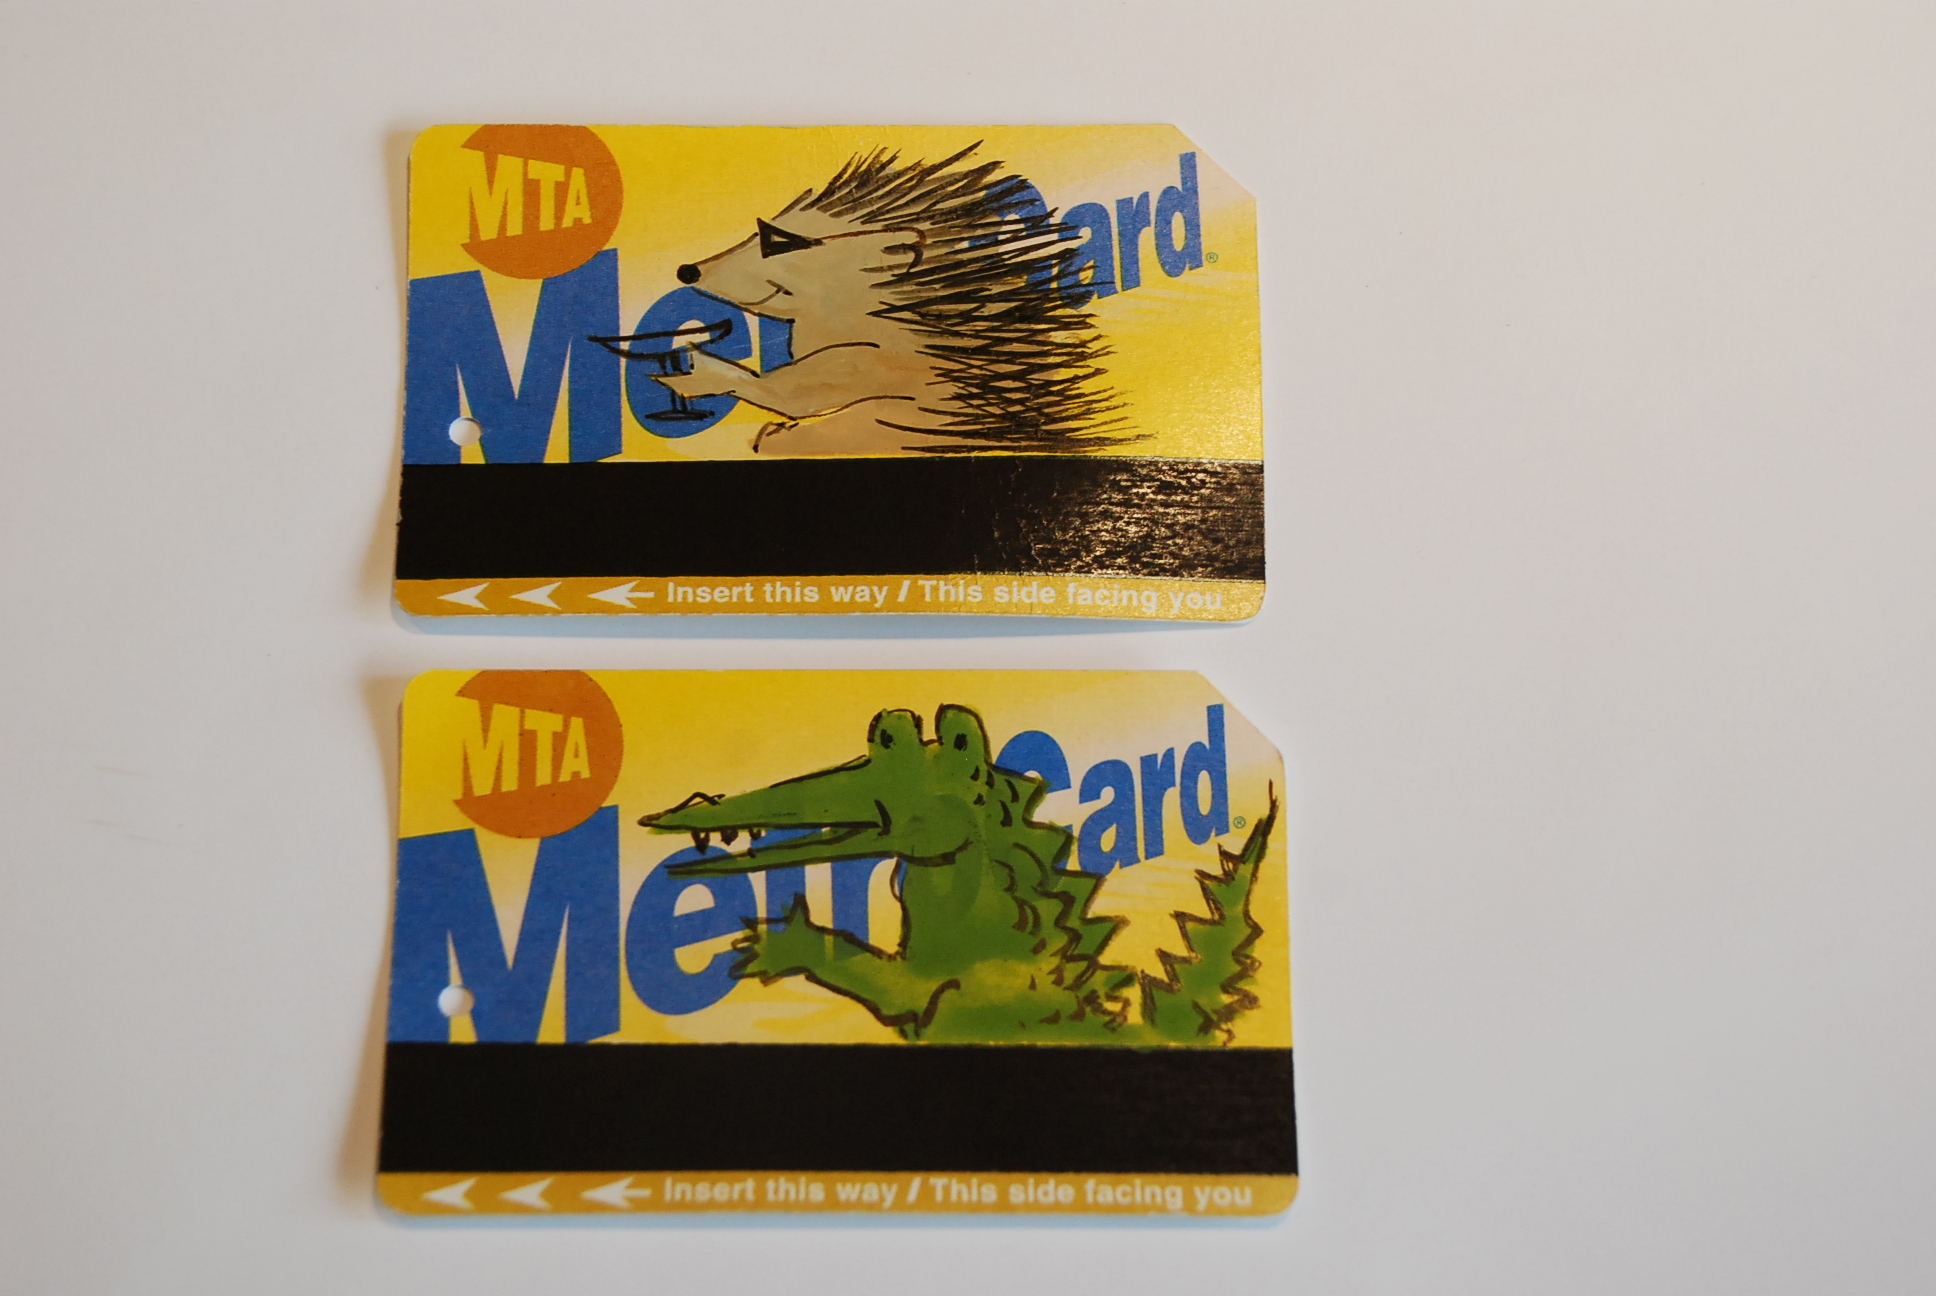 Lancelot and Agile's new business venture, personalized Metro cards